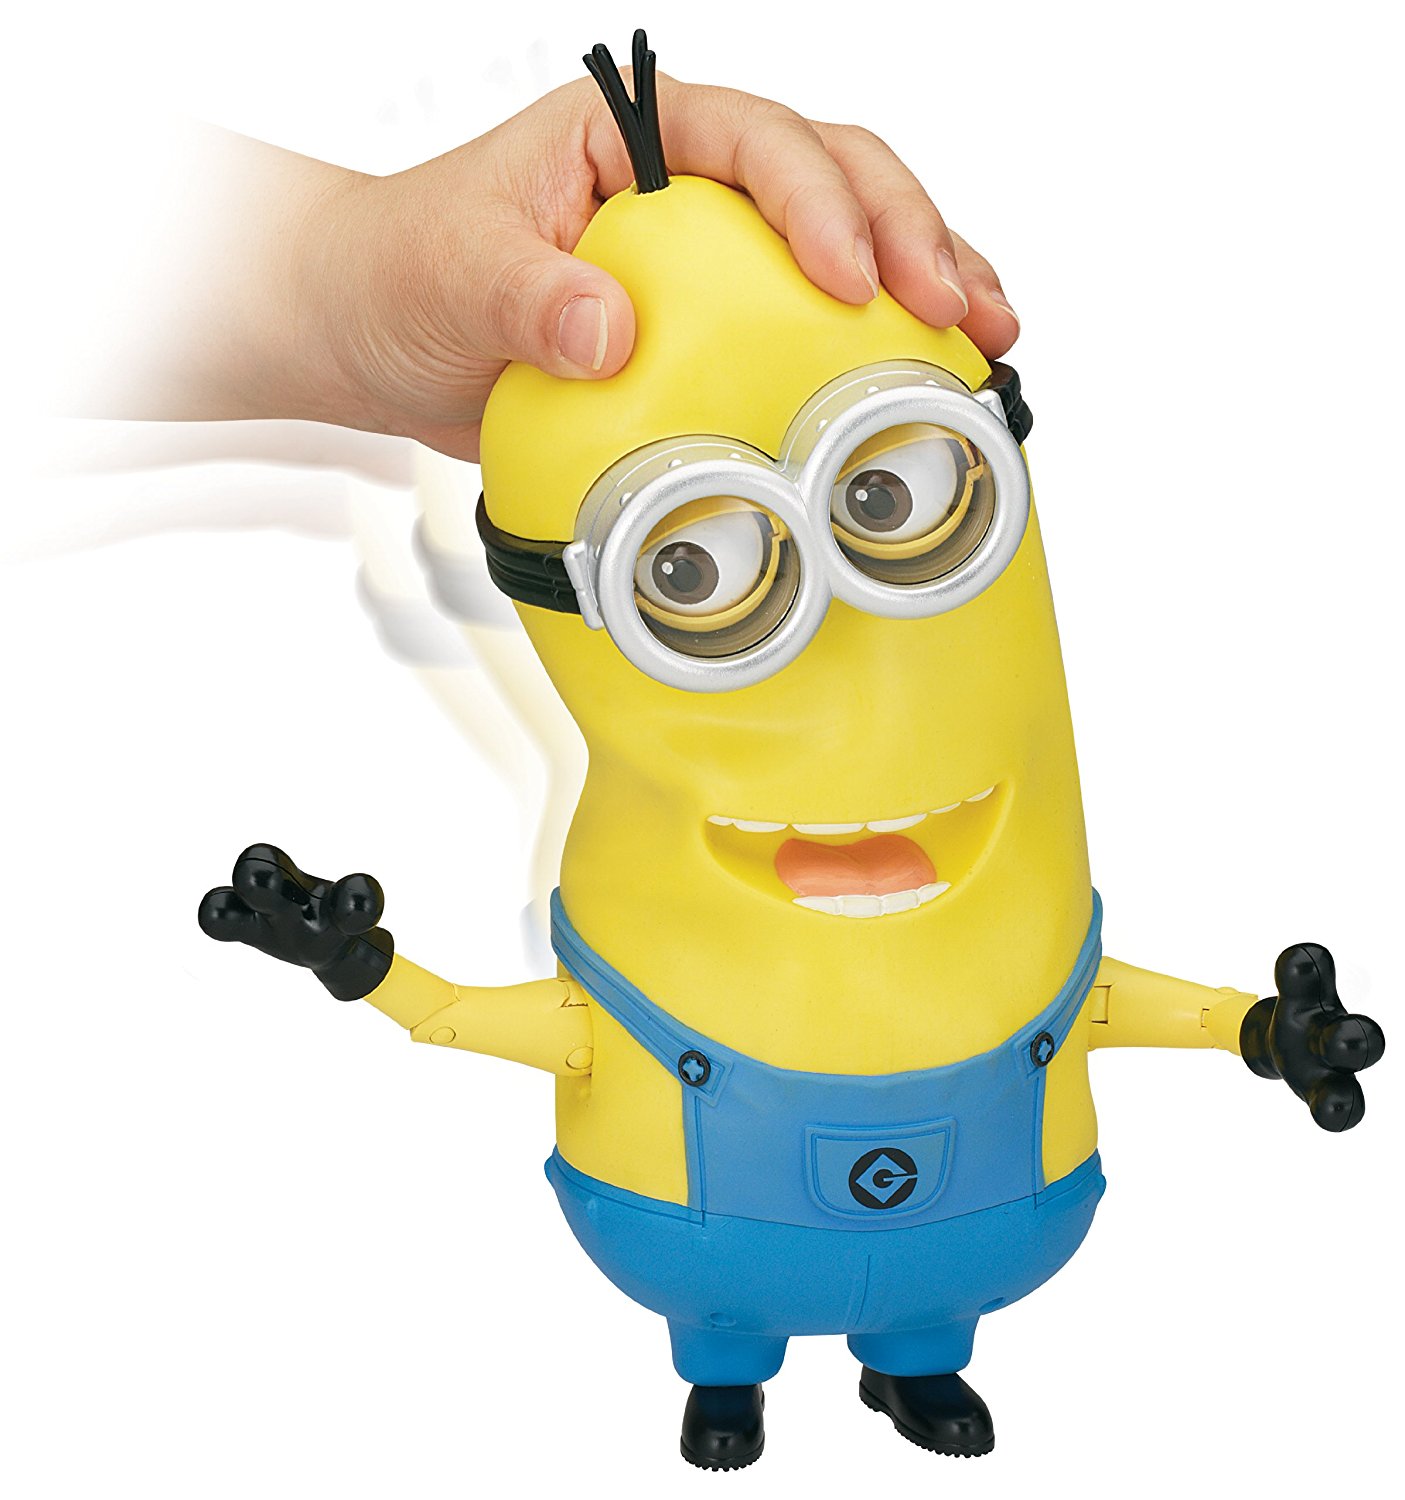 Despicable Me Minion Singing 'Tim' Action Figure Toy